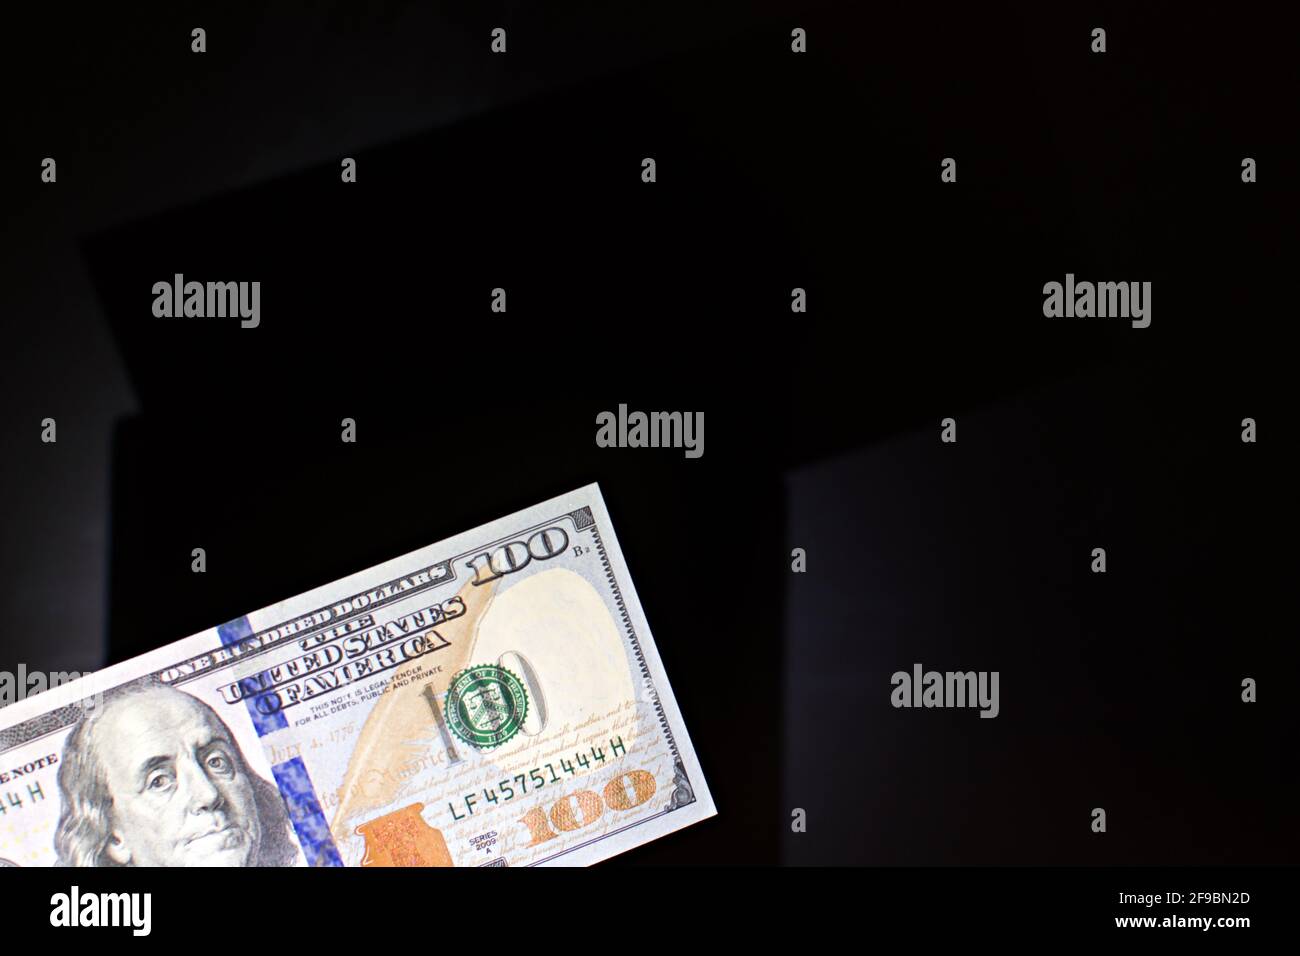 100 US dollars banknote on blurred black background with shadow Stock Photo